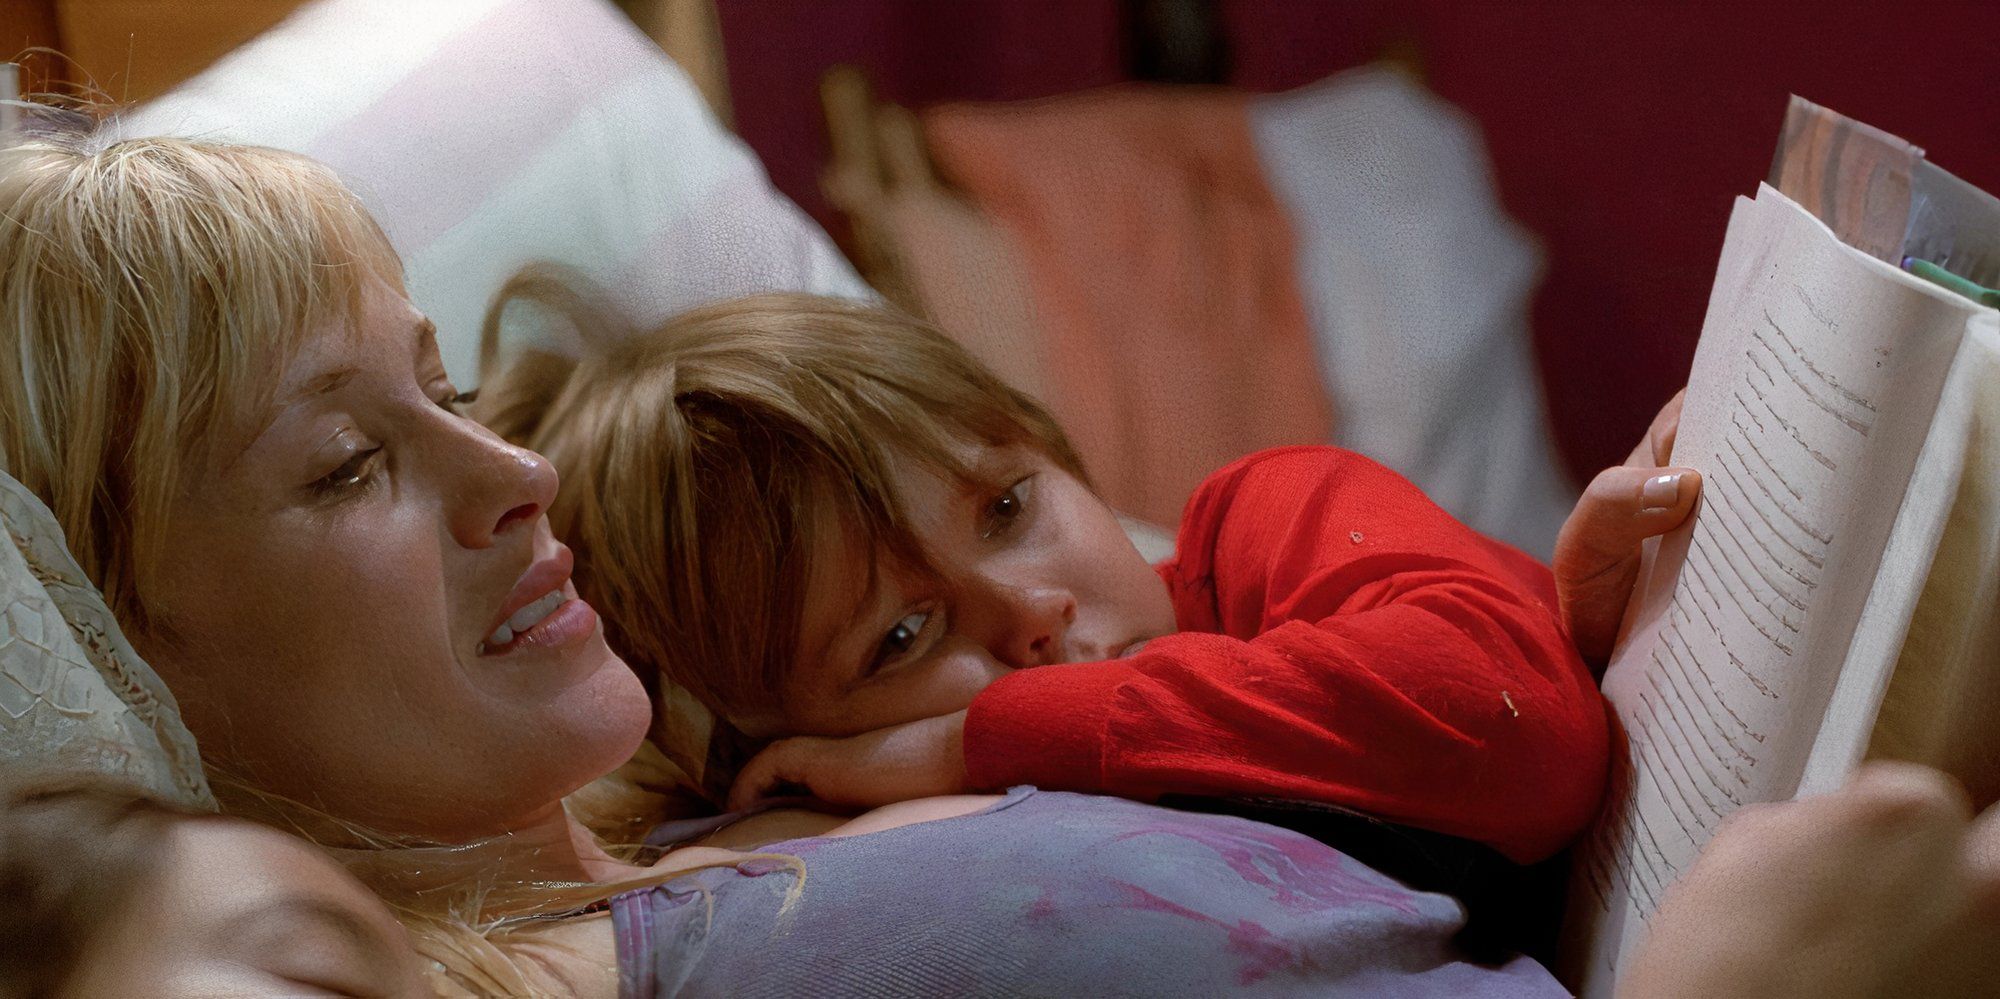 Patricia Arquette as Olivia lying next to a child in bed in Boyhood.